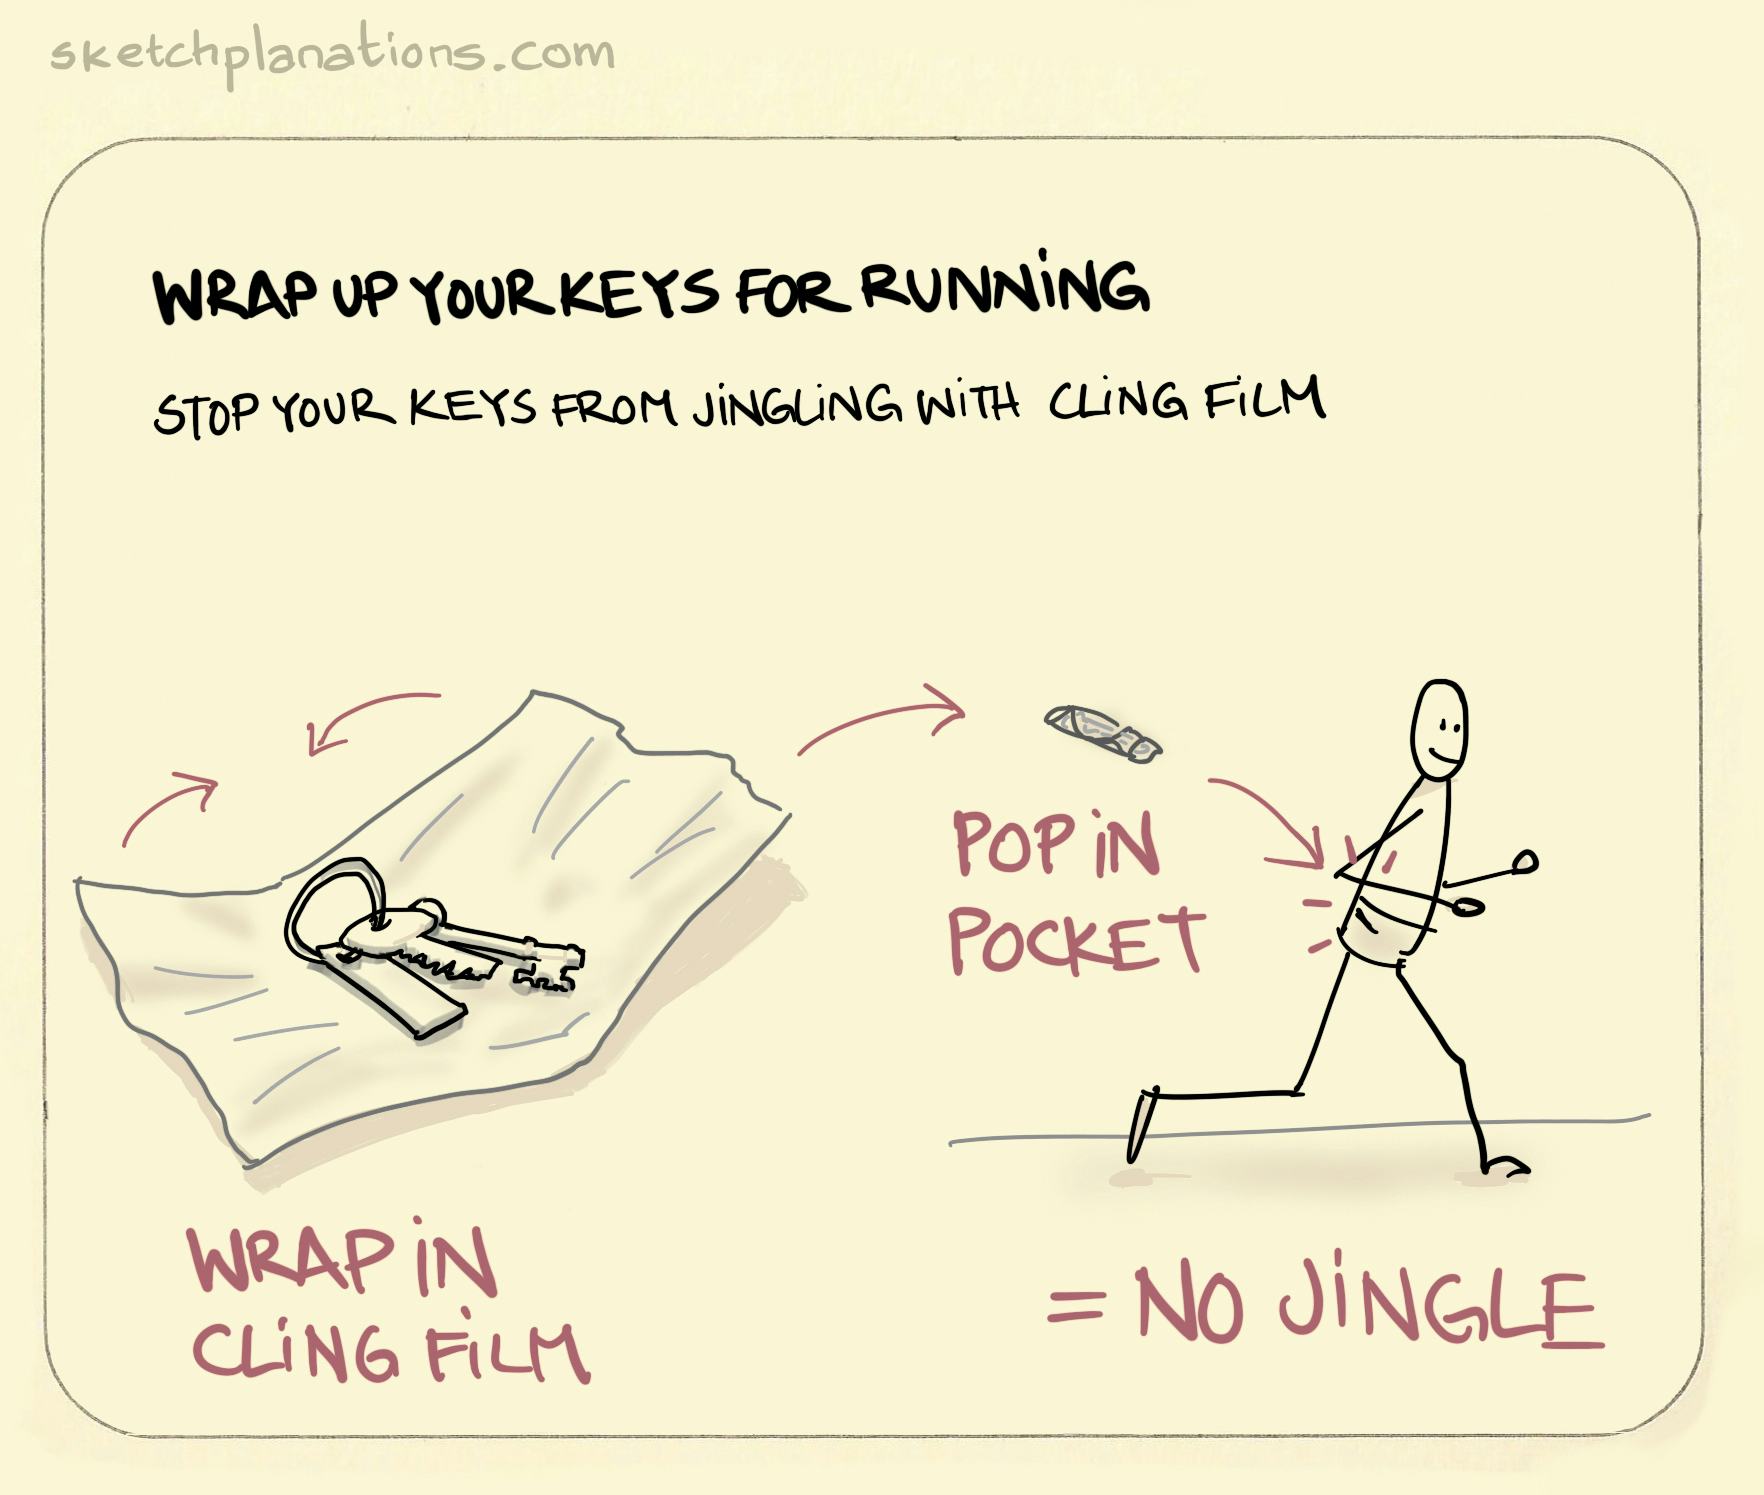 Wrap up your keys for running - Sketchplanations